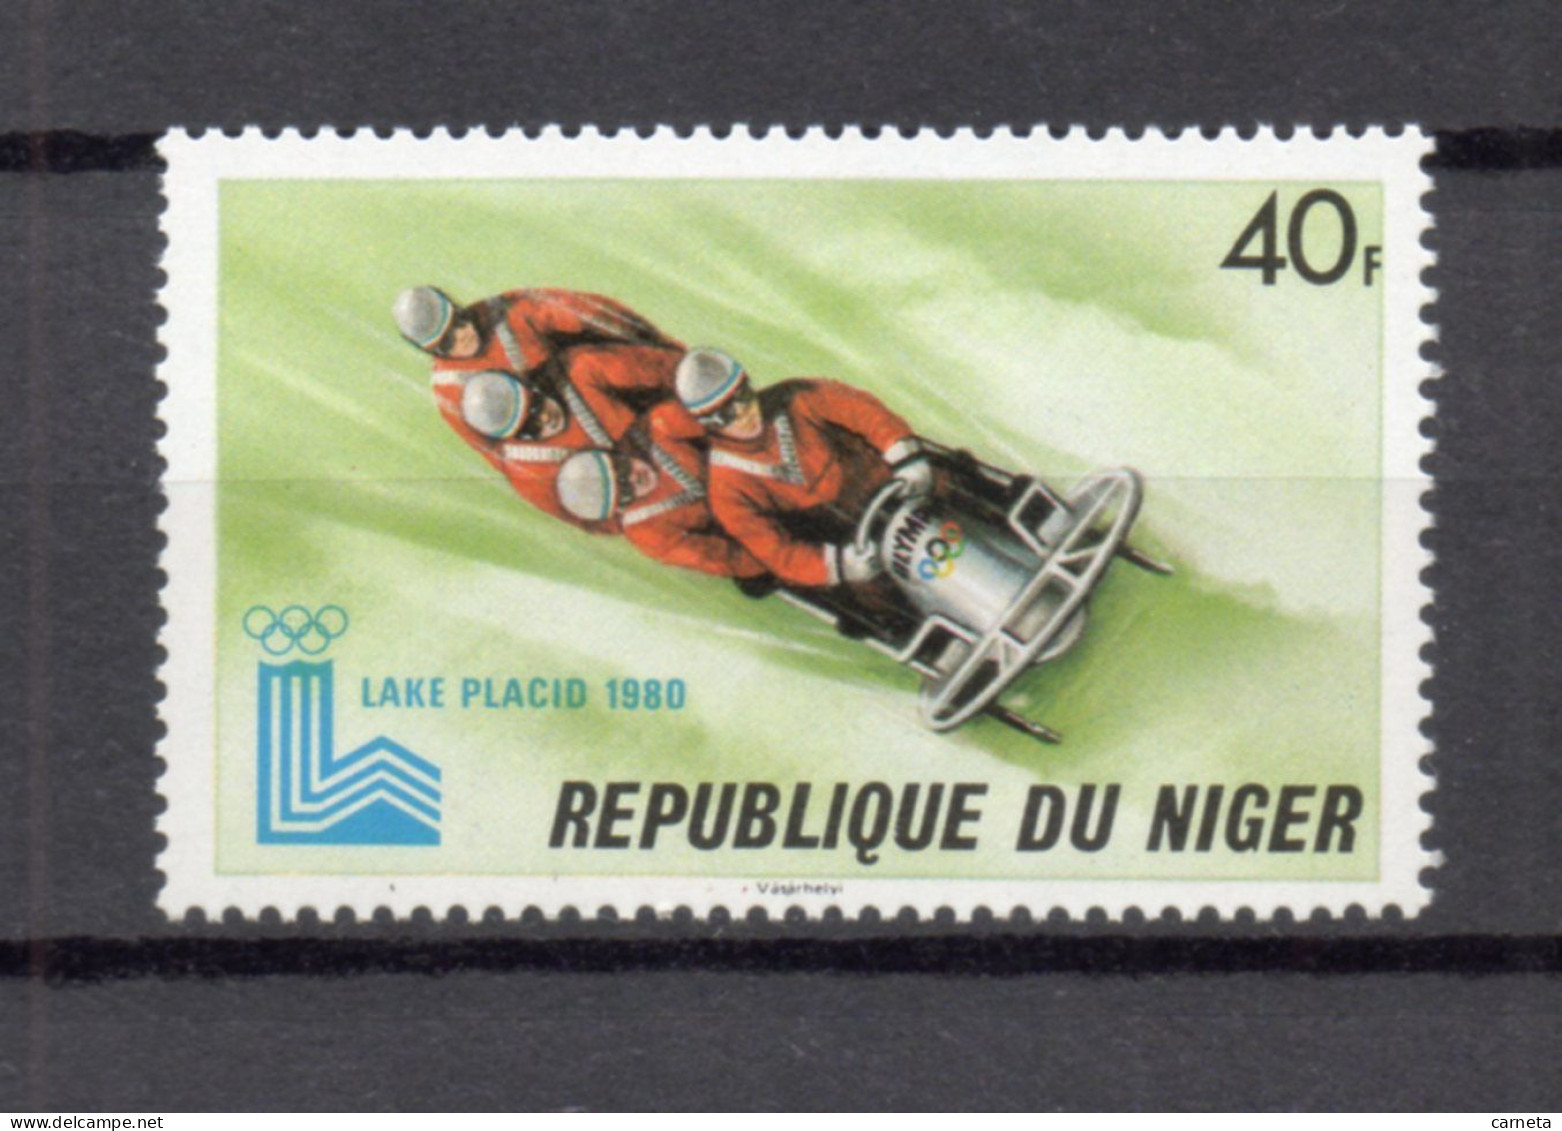 NIGER   N° 492    NEUF SANS CHARNIERE  COTE 0.60€    JEUX OLYMPIQUES LAKE PLACID SPORT - Niger (1960-...)